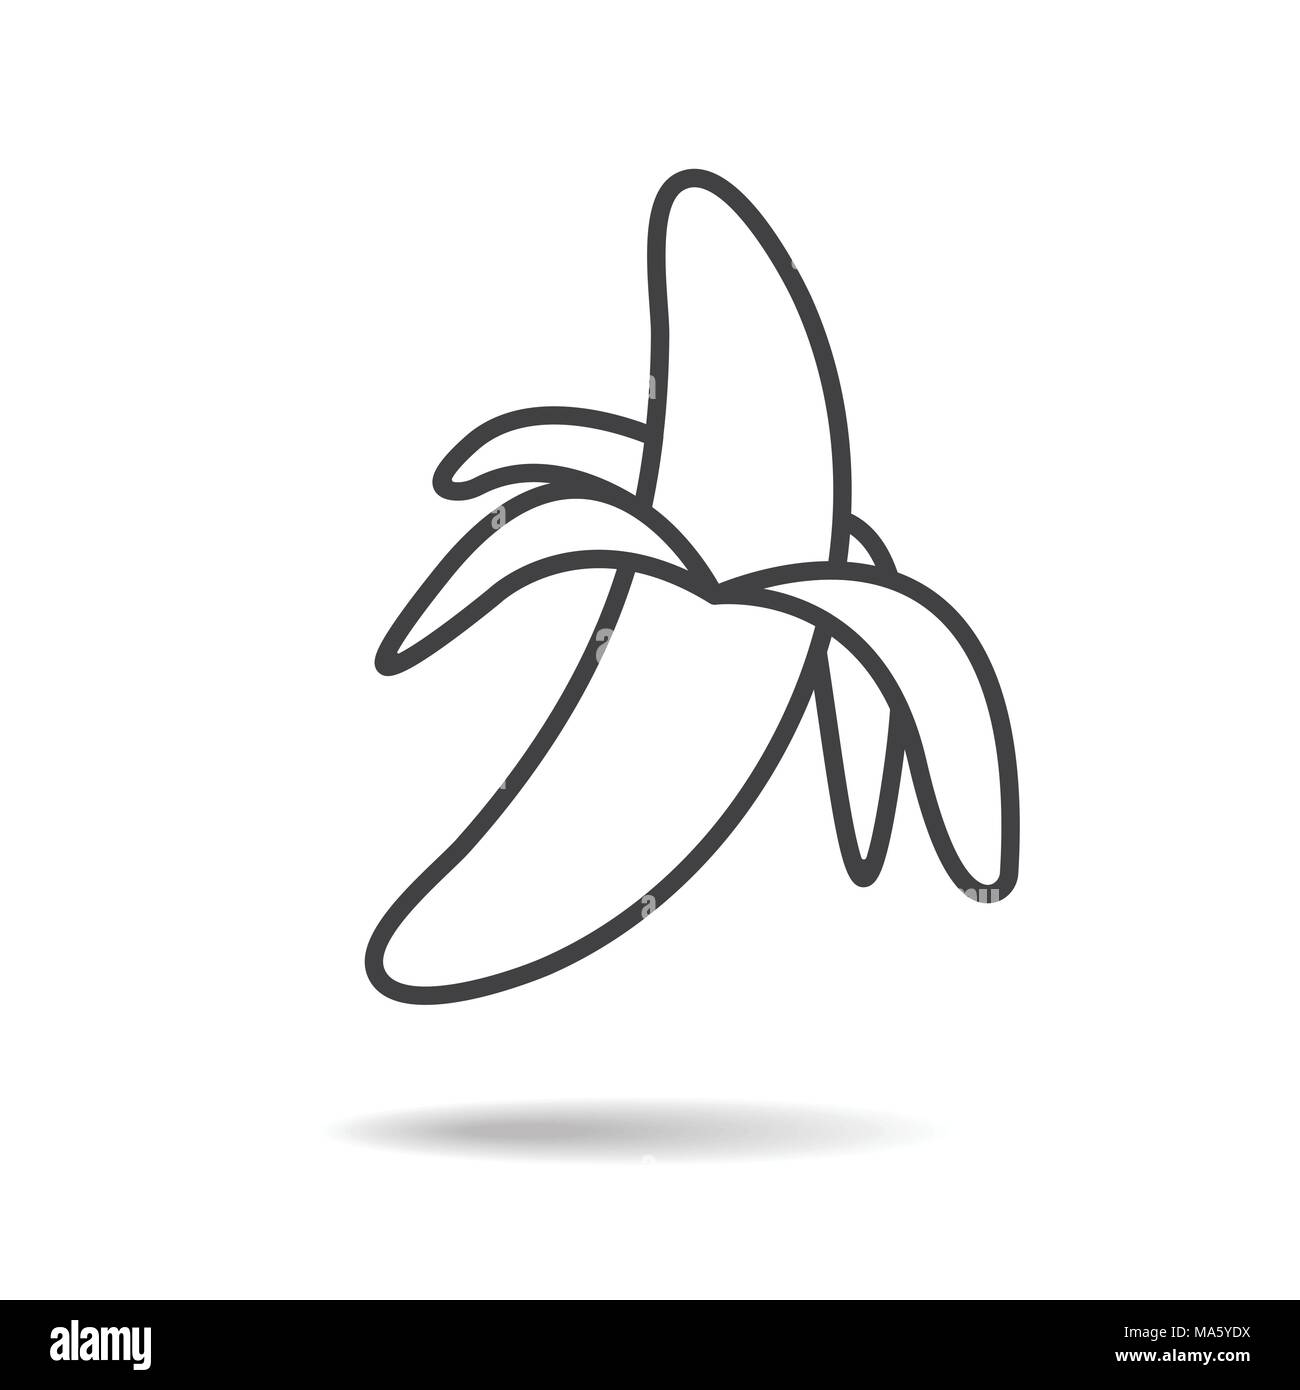 Banana Sketch Hand Drawn Sketch Style Black Banana On White Background  Stock Illustration - Download Image Now - iStock